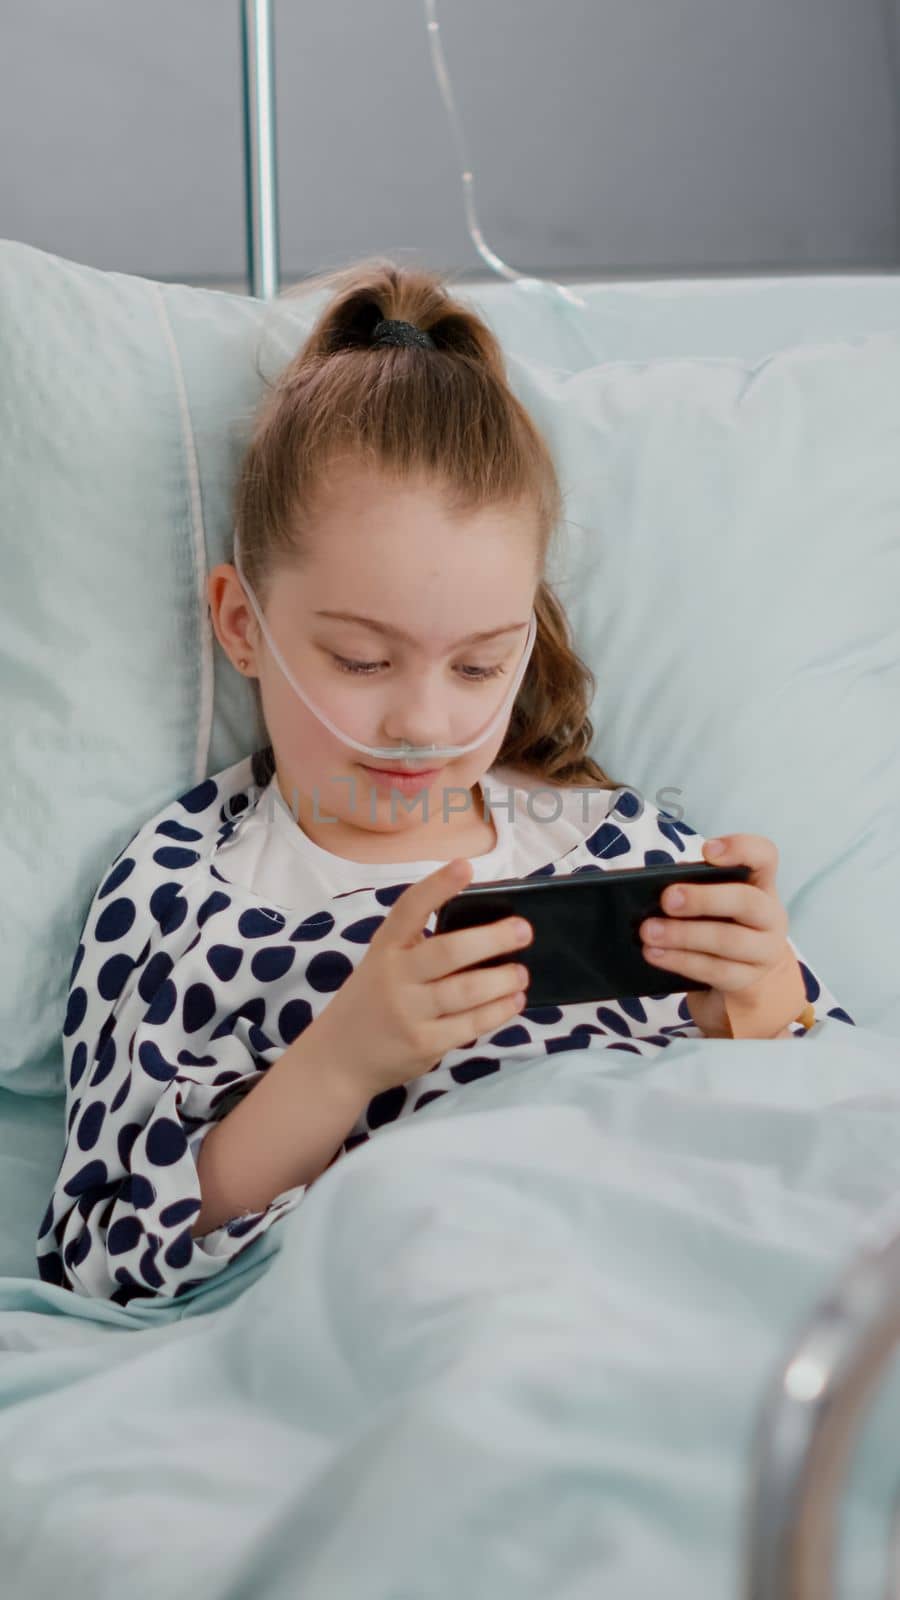 Sick little child resting in bed playing online video games using smartphone by DCStudio